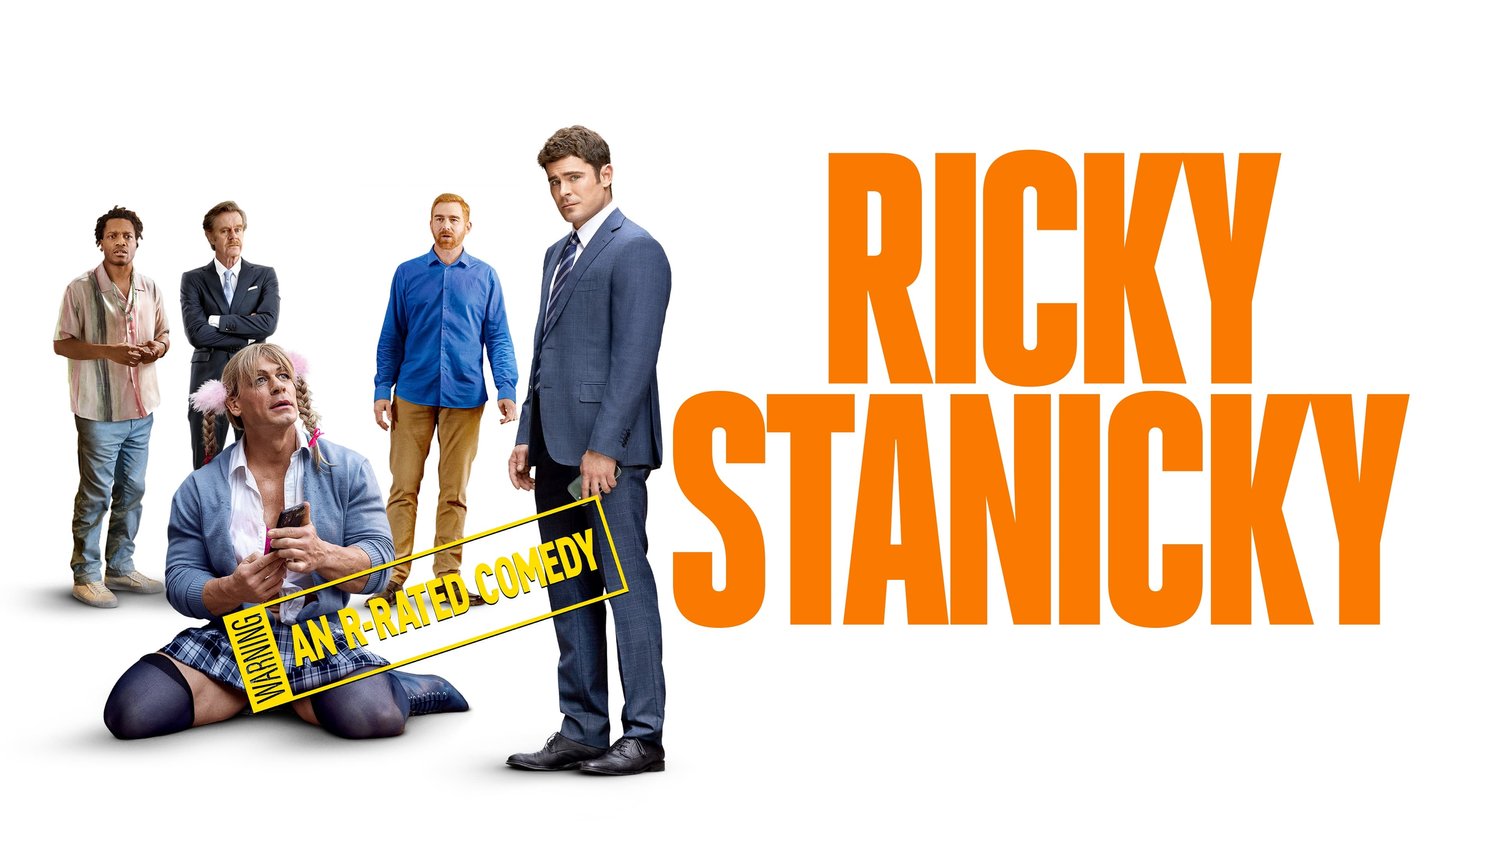 You are currently viewing Ricky Stanicky – Official Trailer